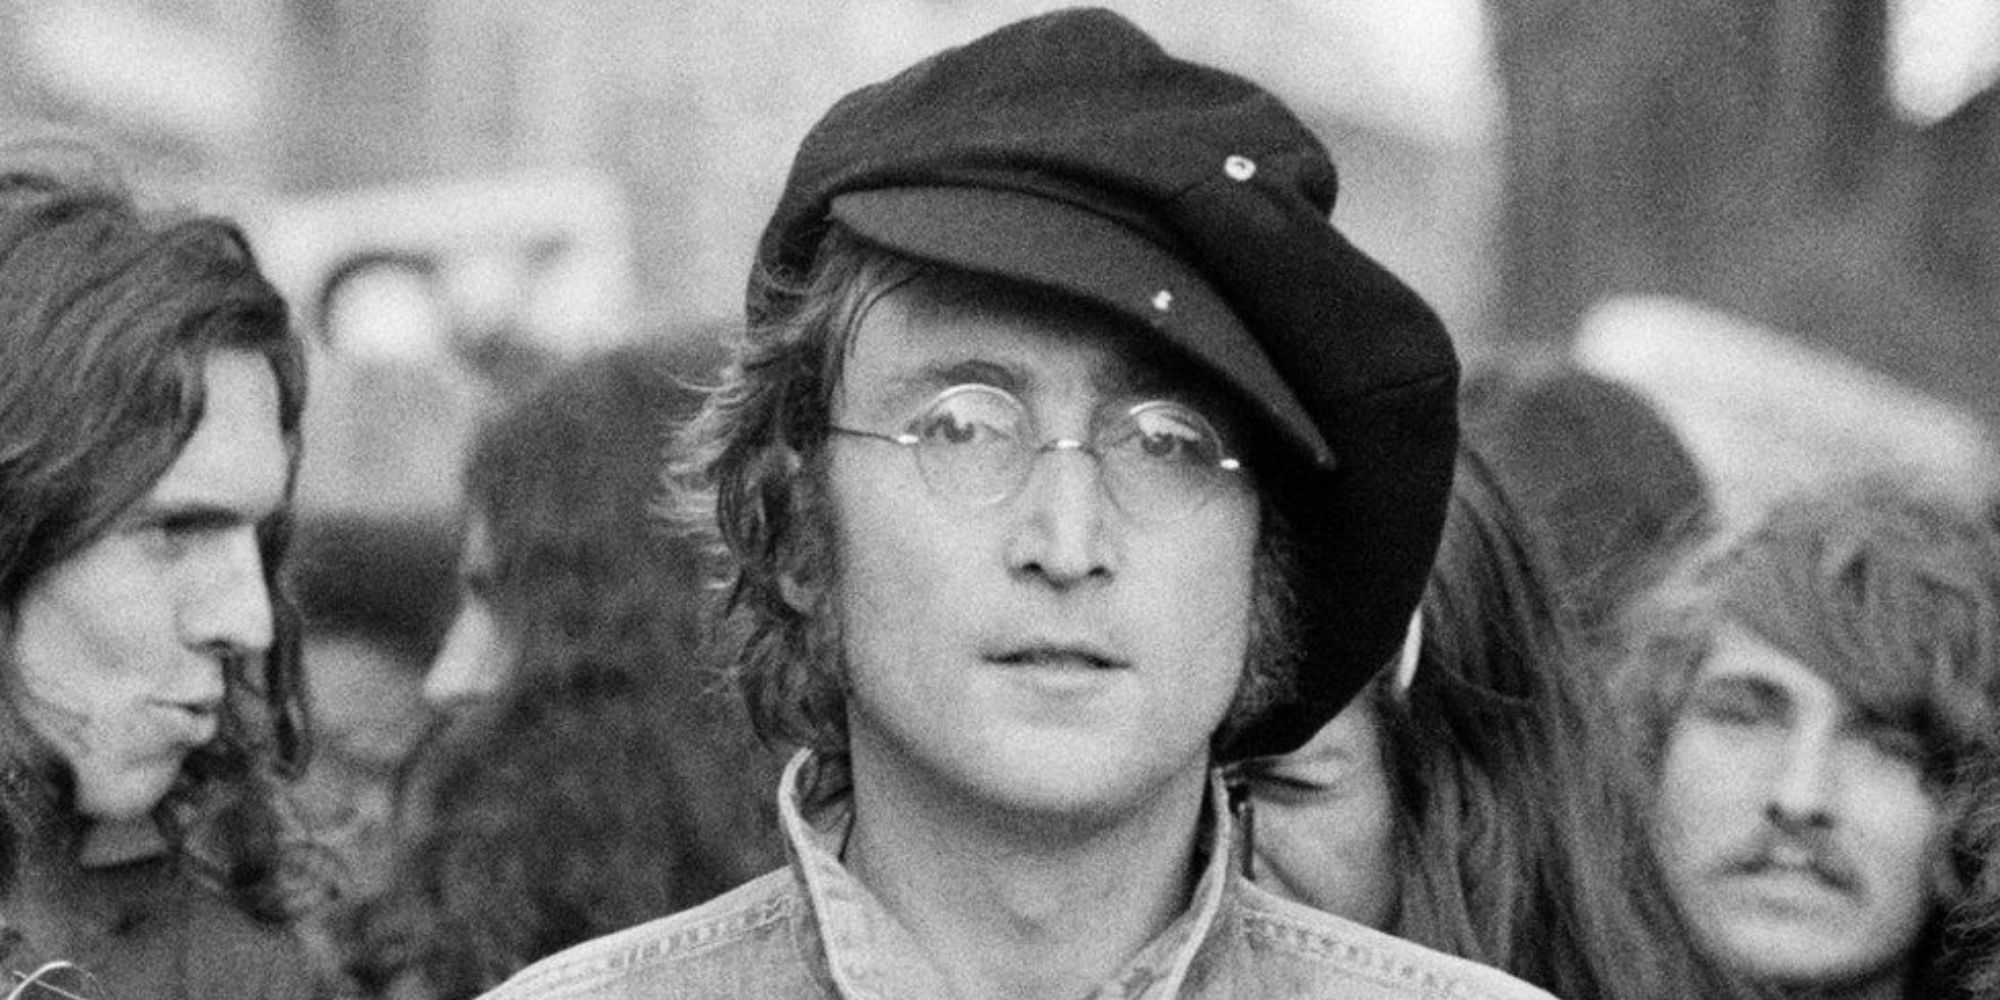 _115867680_lennon_75_gettyimages-107715151